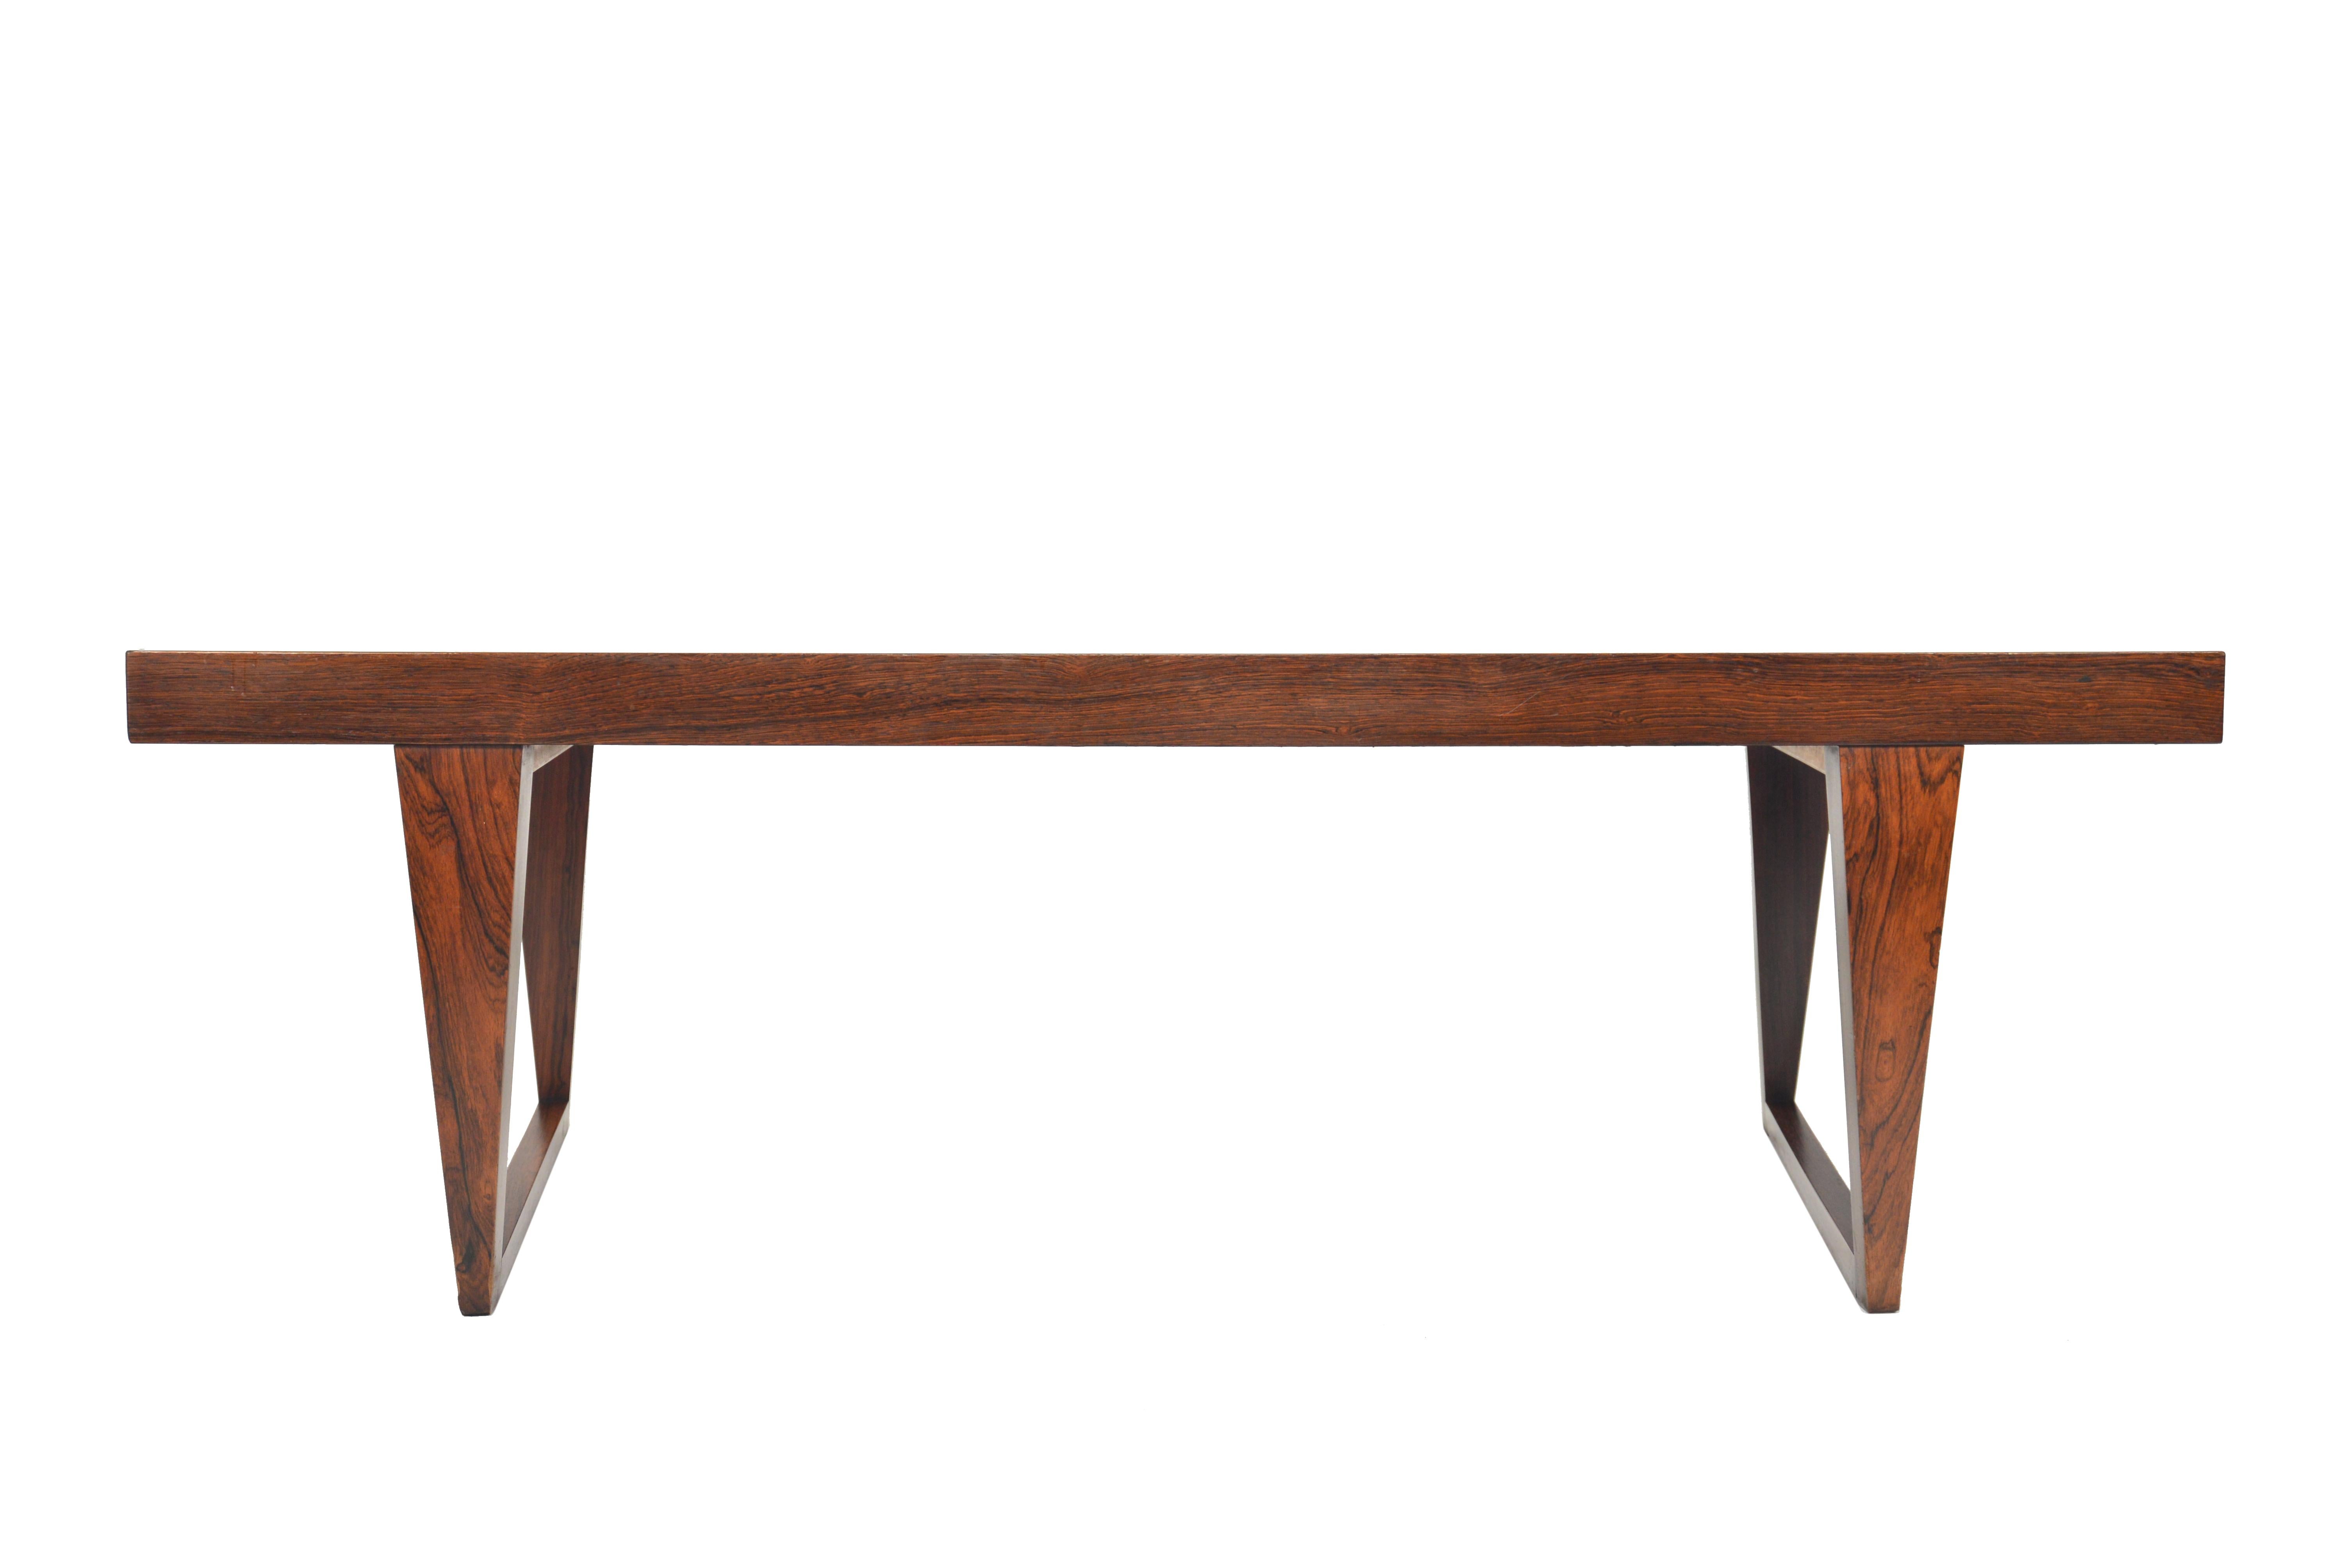 This Danish modern midcentury coffee table in rosewood was designed by Leif Hansen for the ‘Geisha’ collection. Expertly built, this gorgeous piece features a sweeping curve rosewood tabletop and stands on a sleigh base. In excellent original